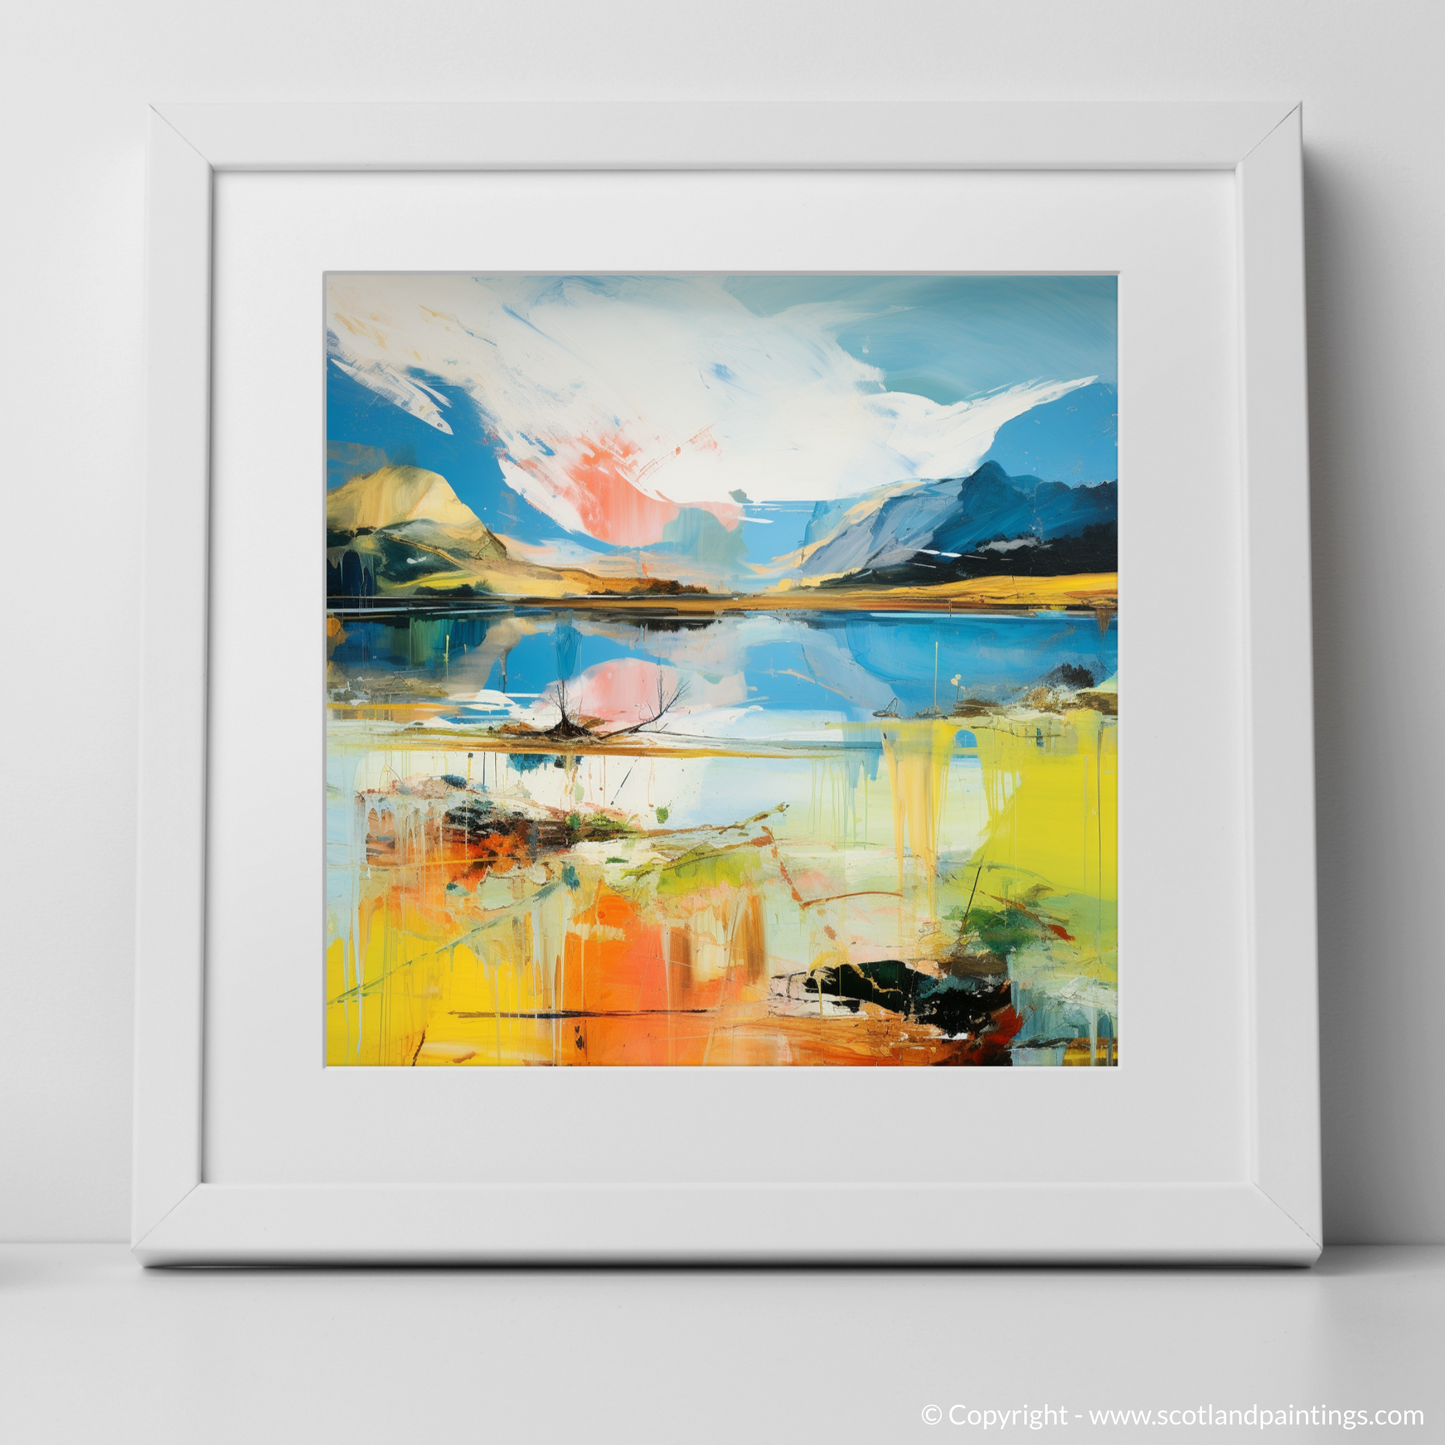 Art Print of Loch Awe, Argyll and Bute in summer with a white frame